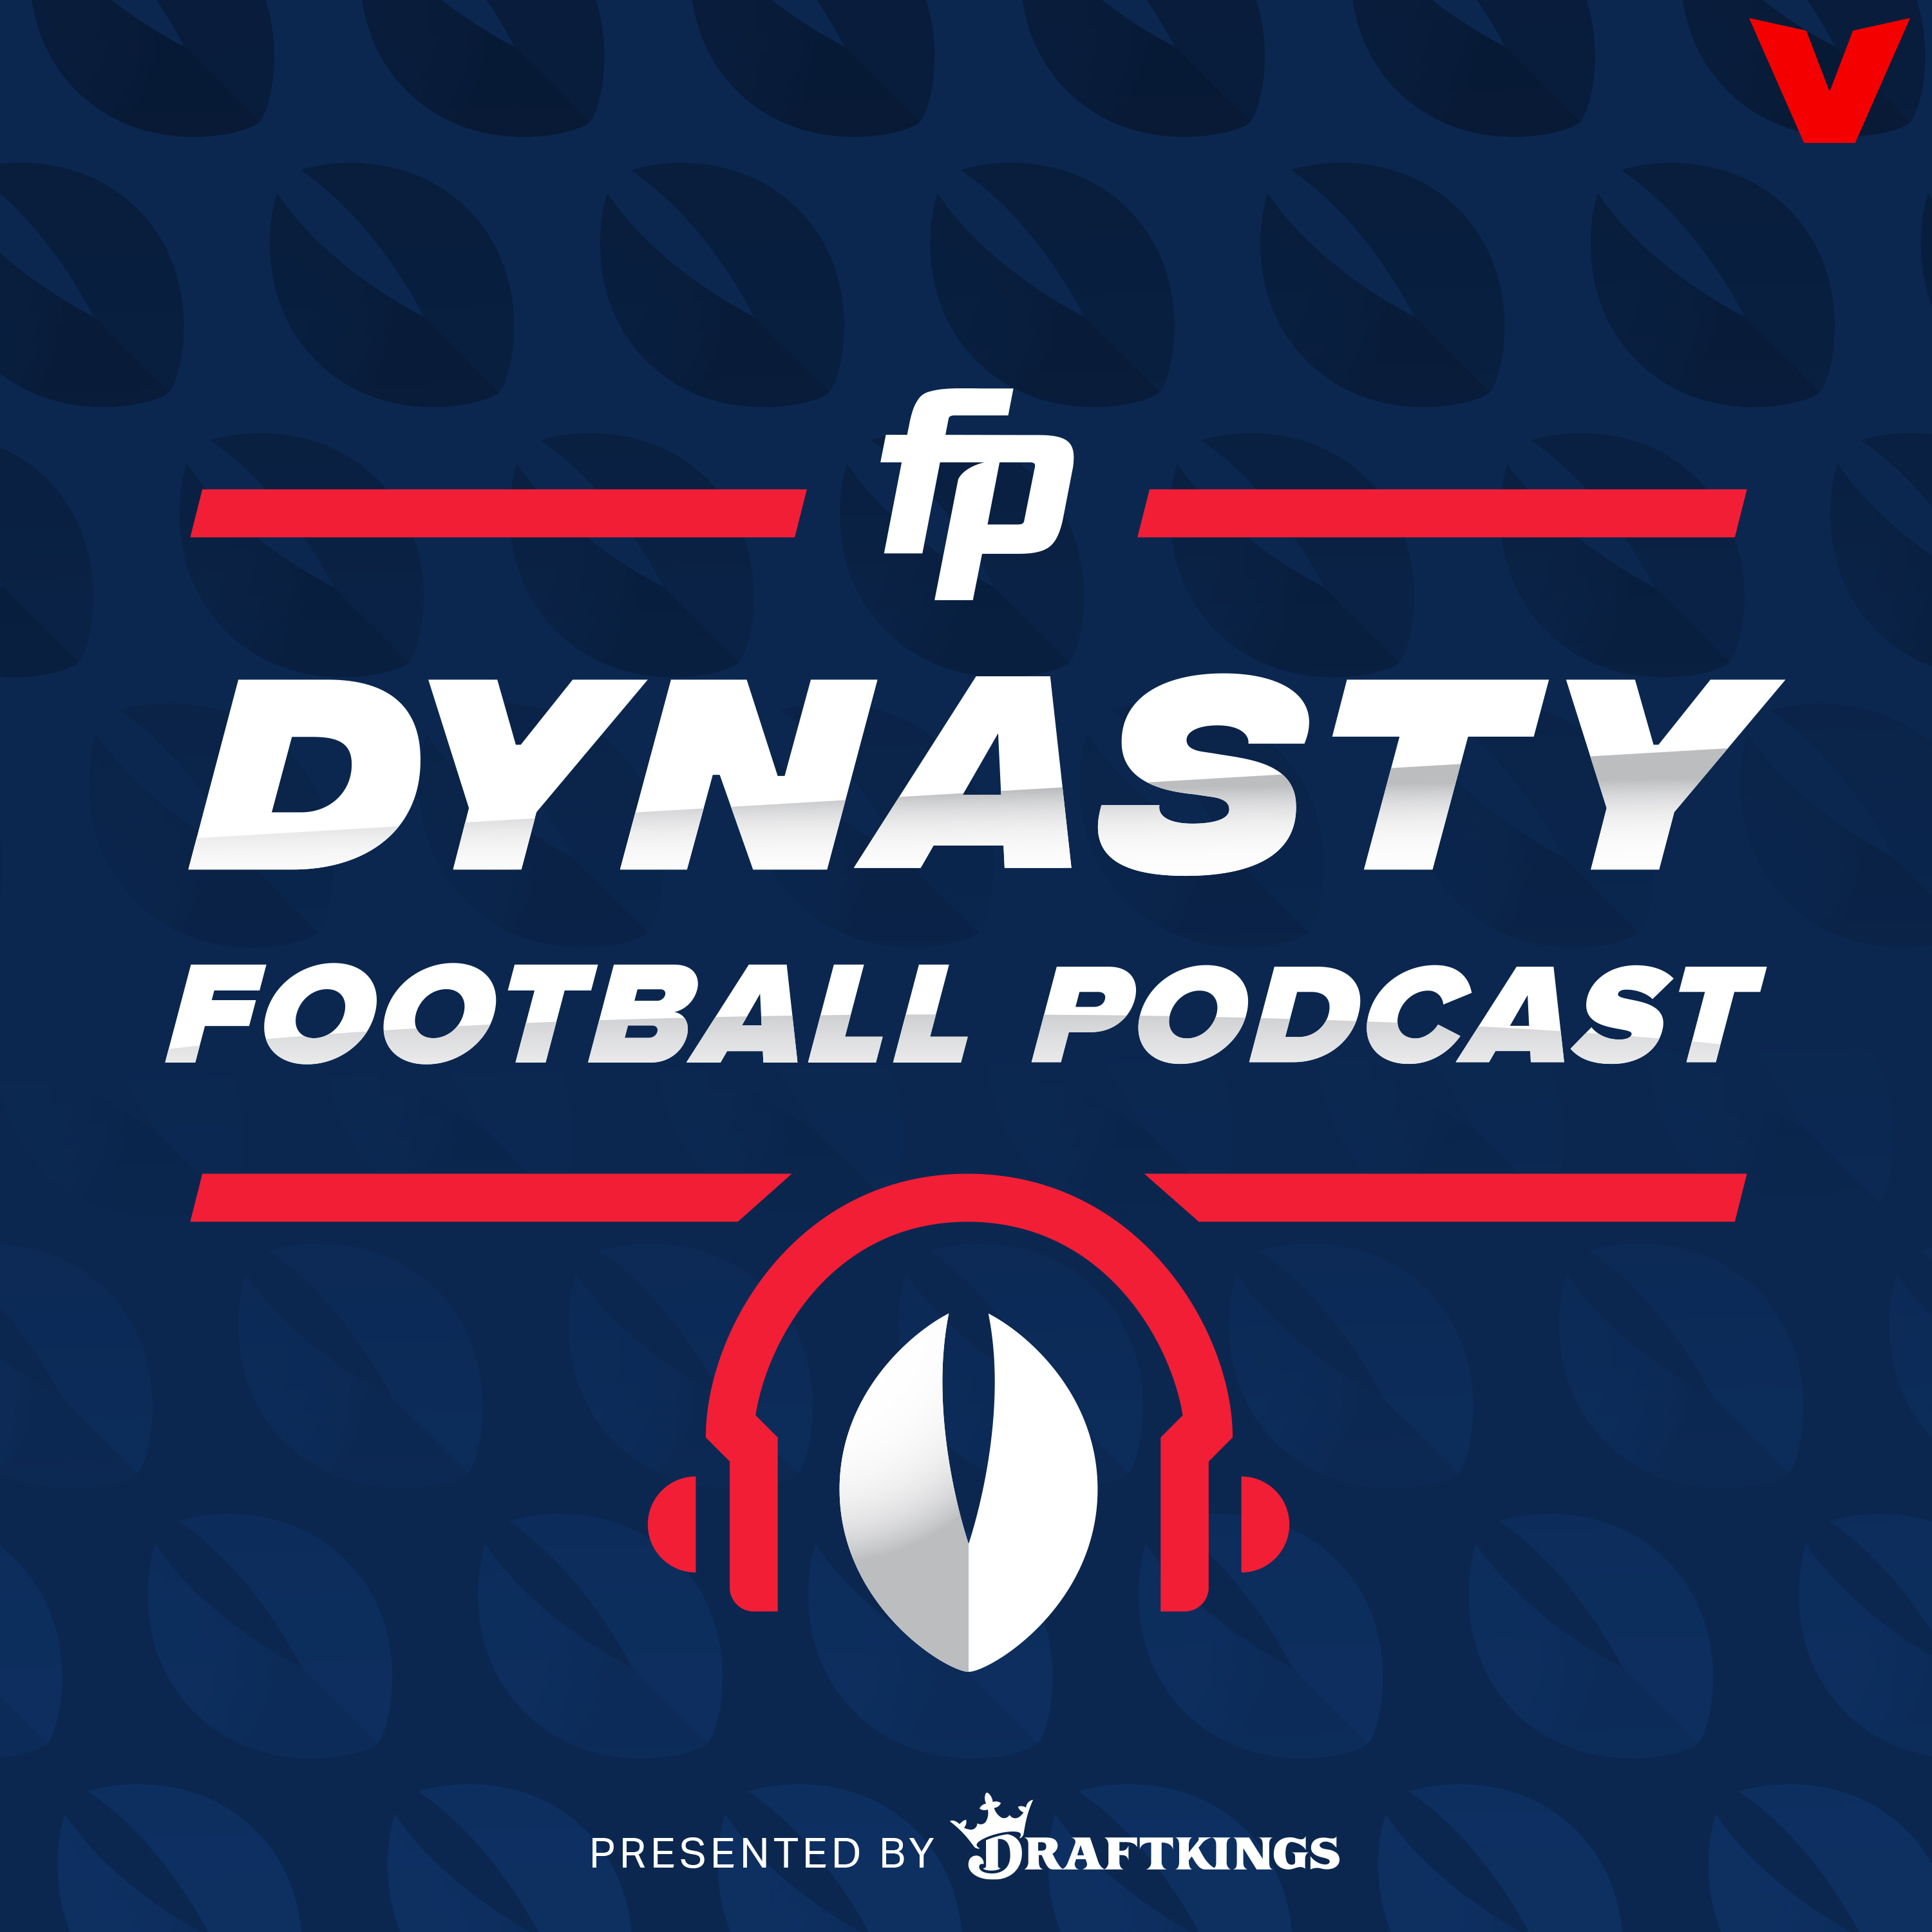 Buy Low, Sell High: 20 Trade Candidates to Revamp Your Dynasty Roster (Ep. 139)